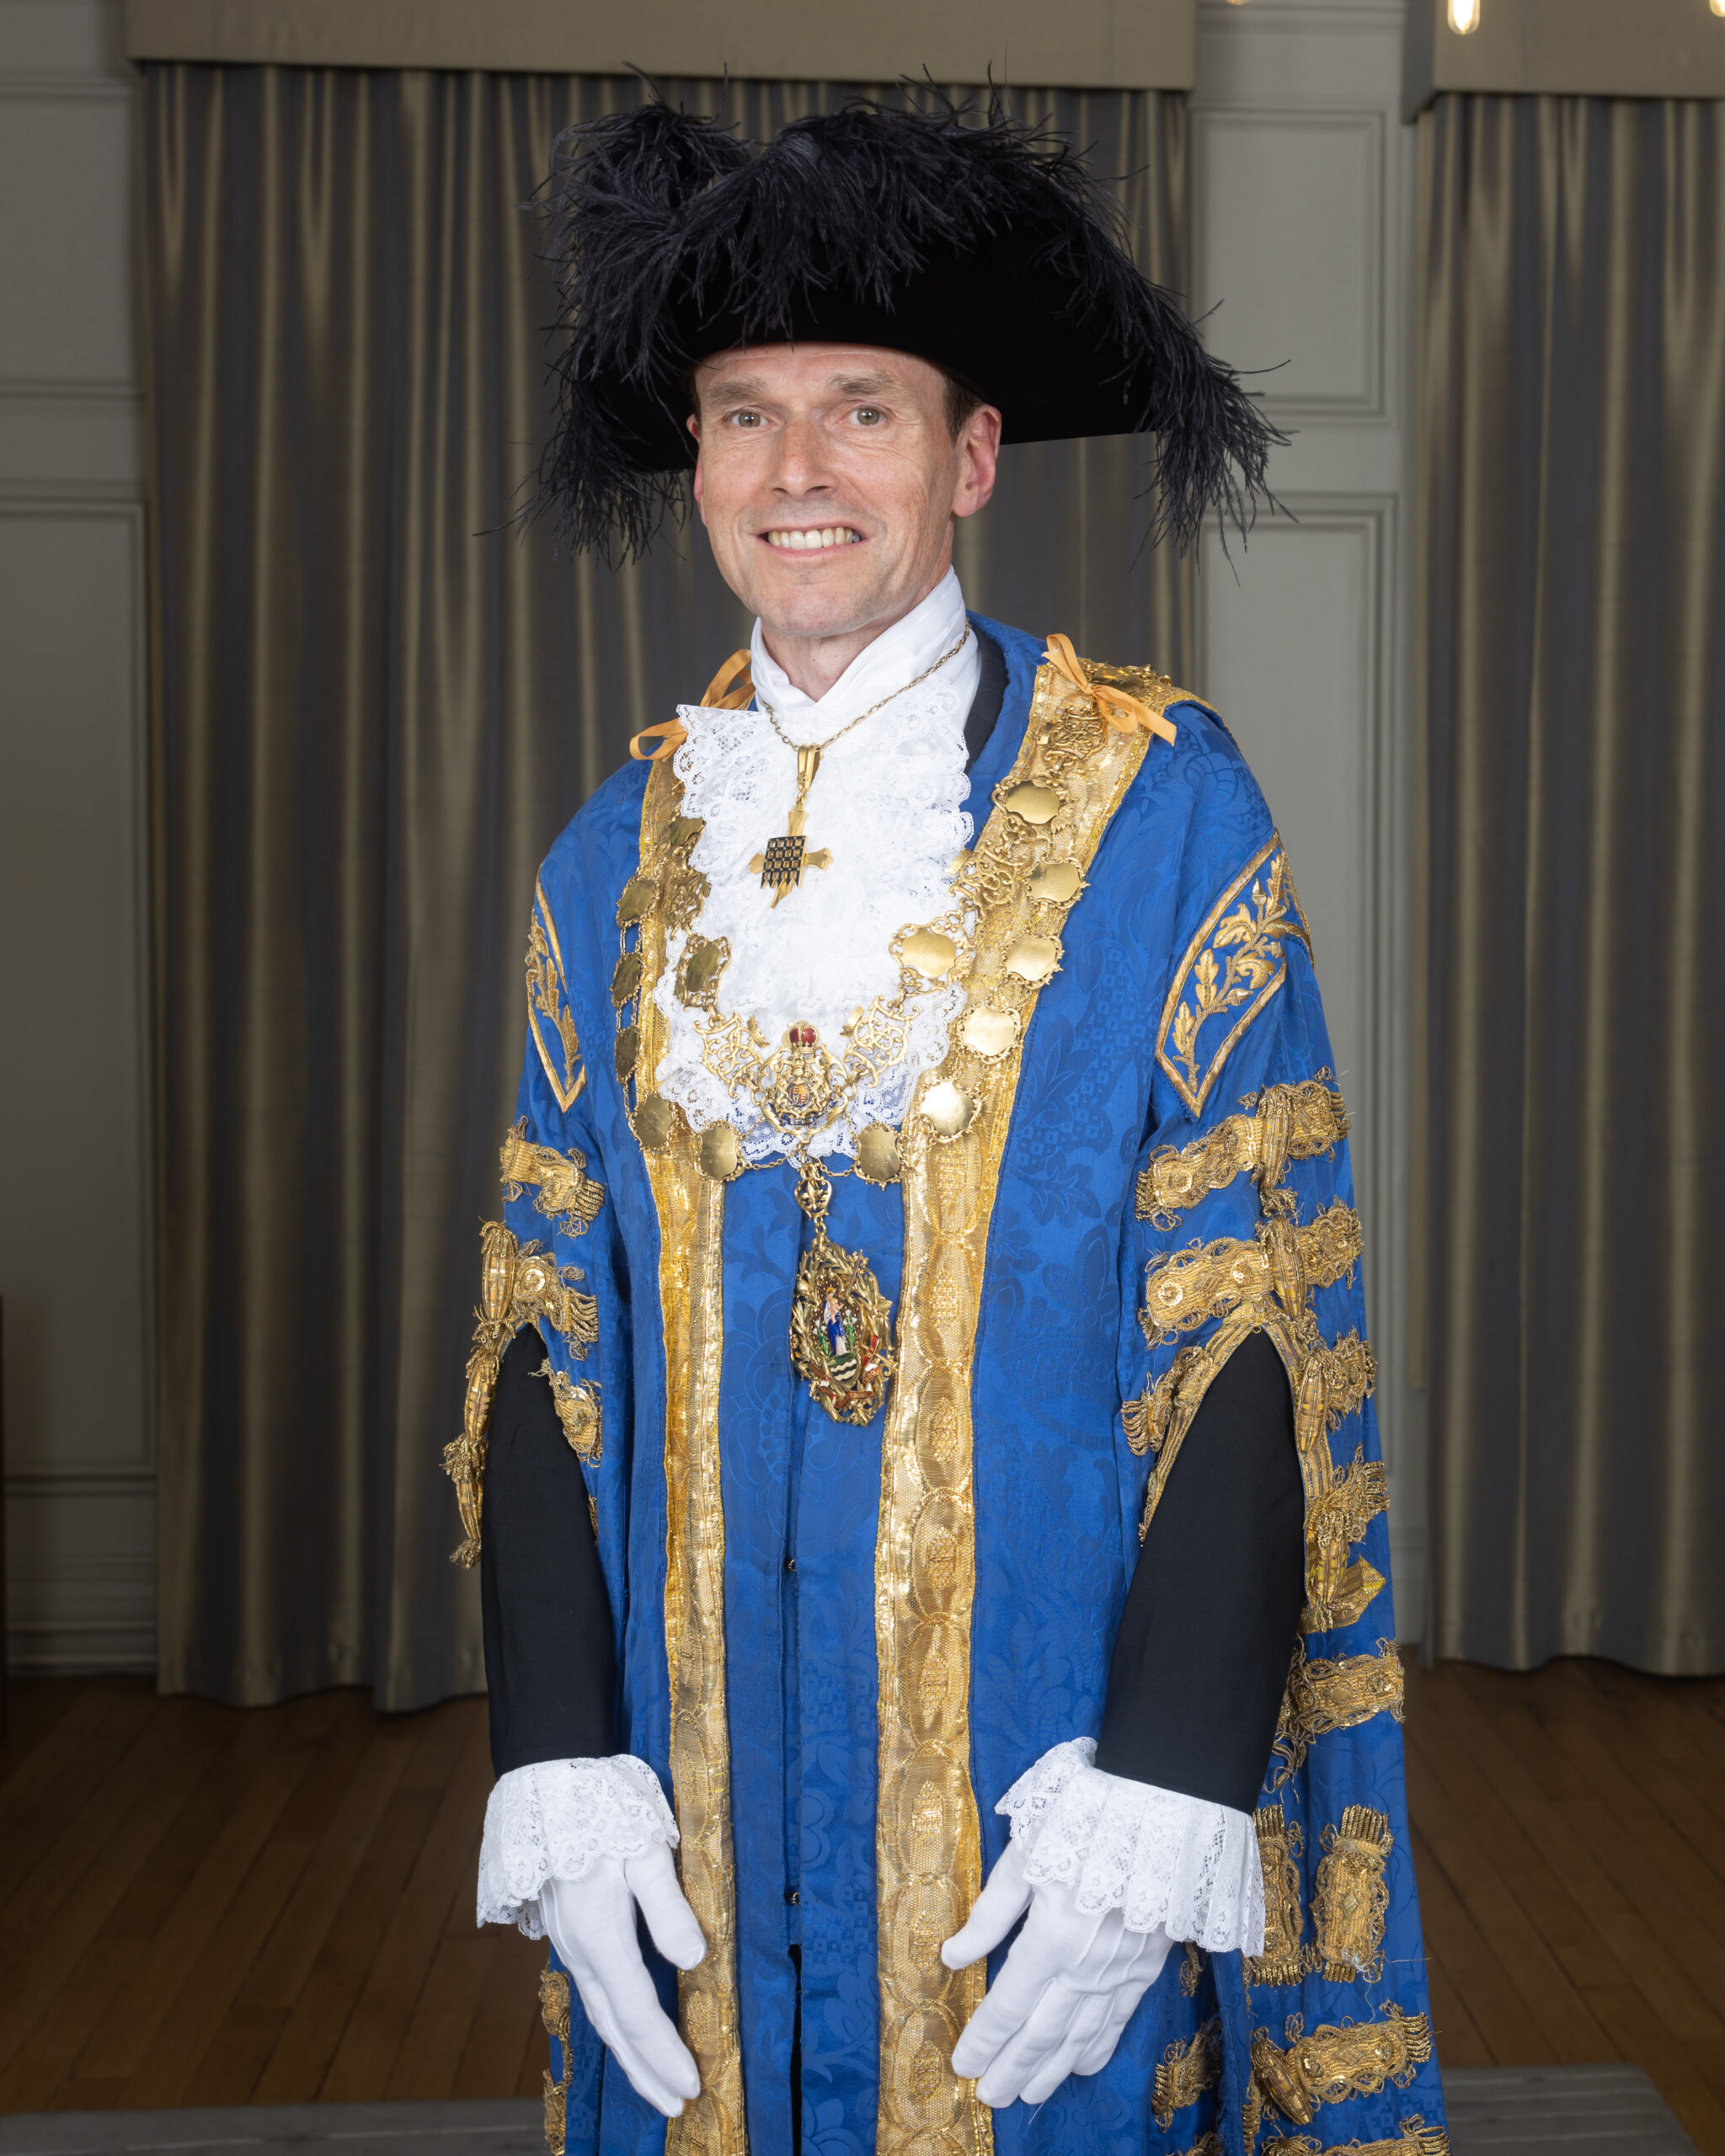 Westminster City Council elects Catholic Lord Mayor